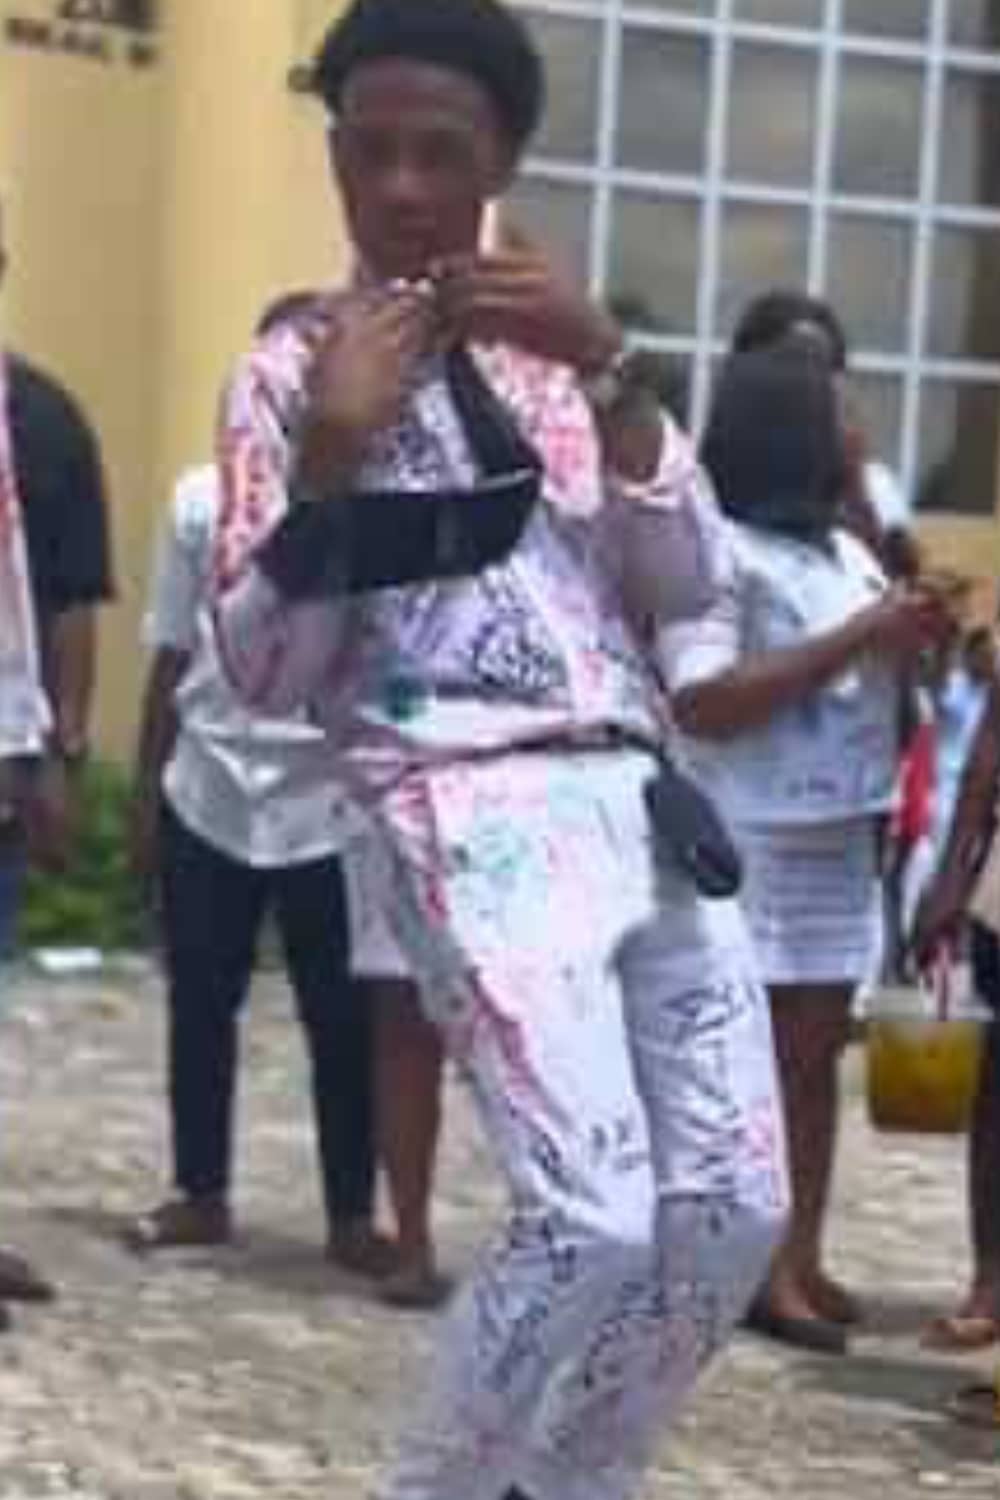 Moment medical graduate paints town red with joyful dance after 7 years in university(Video)